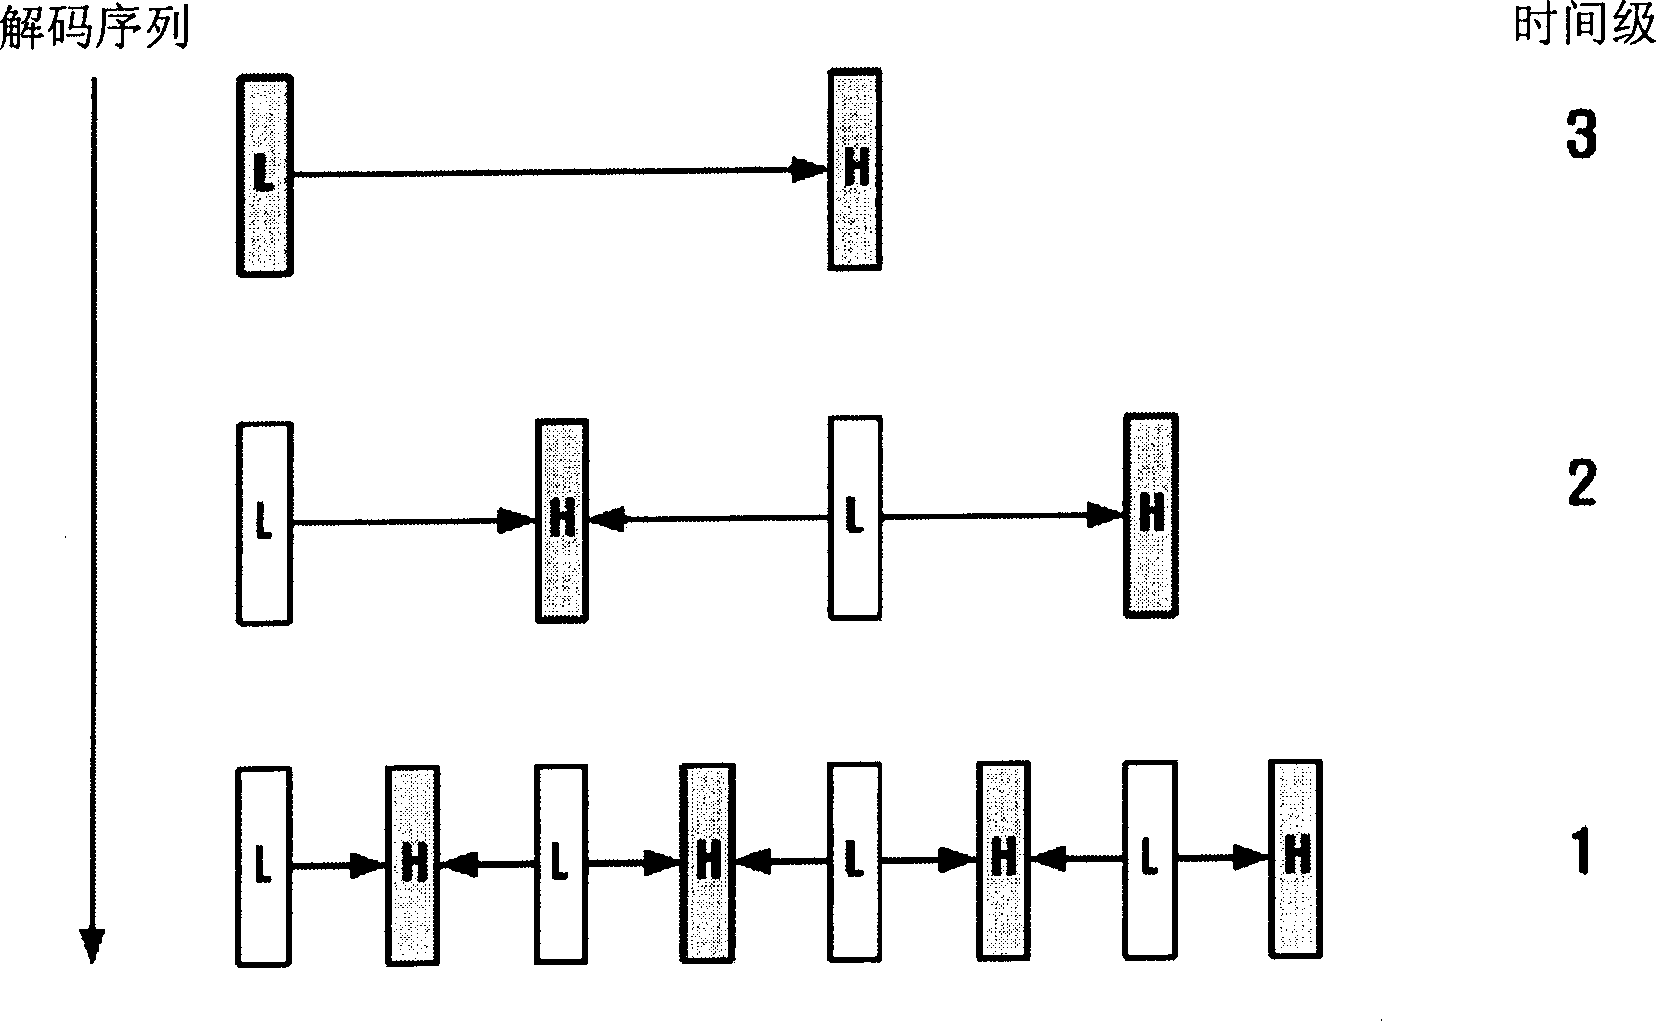 Scalable video coding method and apparatus using base-layer